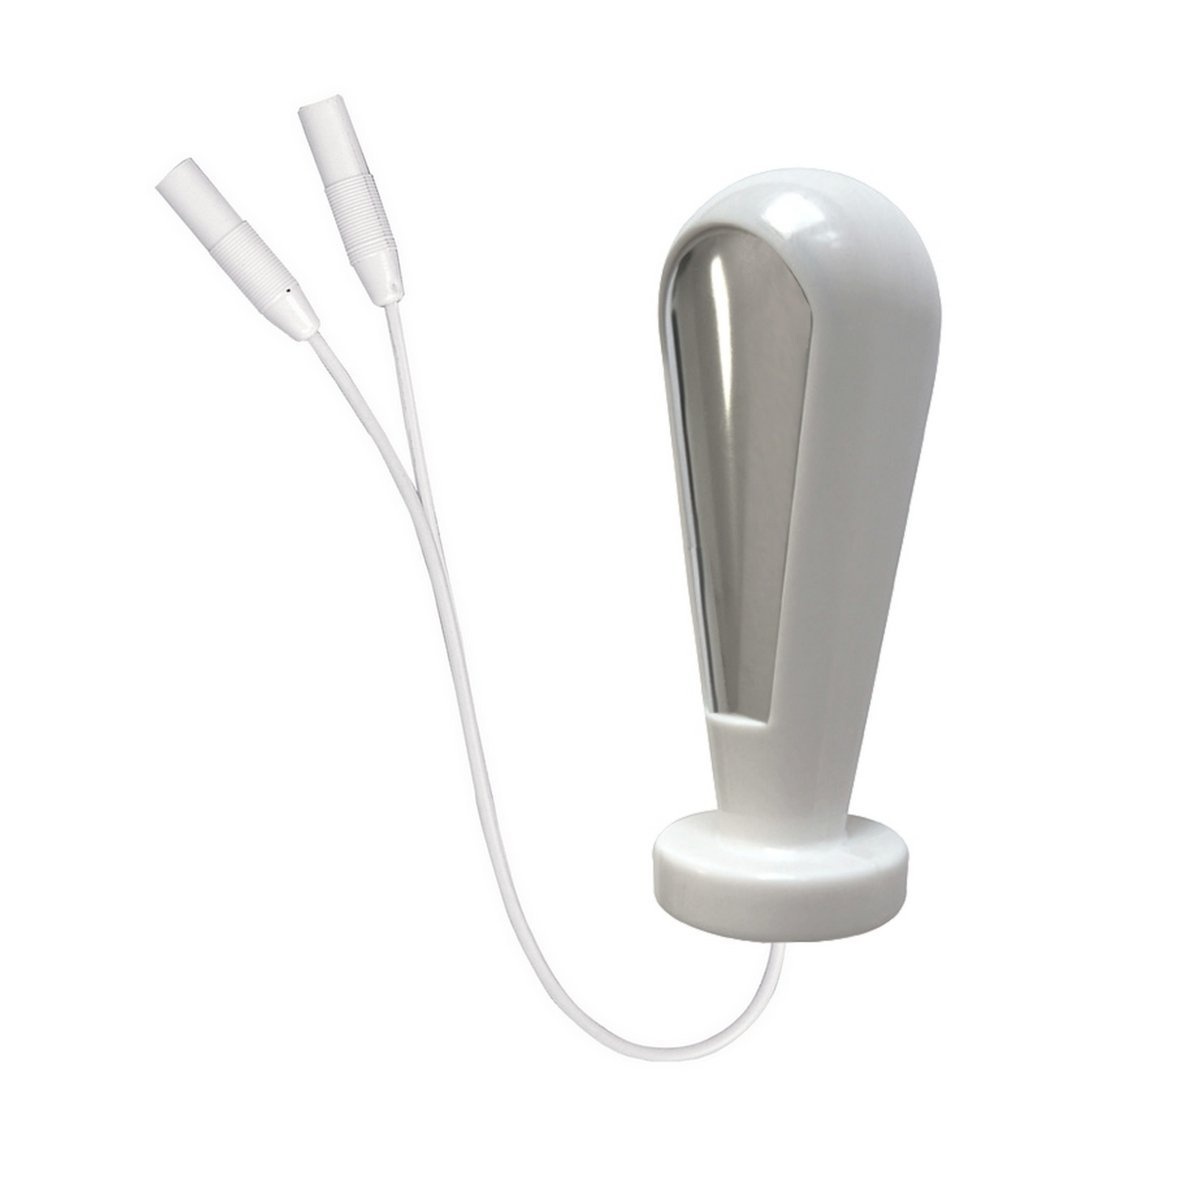 Incontinence Vaginal Probe for use with ALLPFS image 0